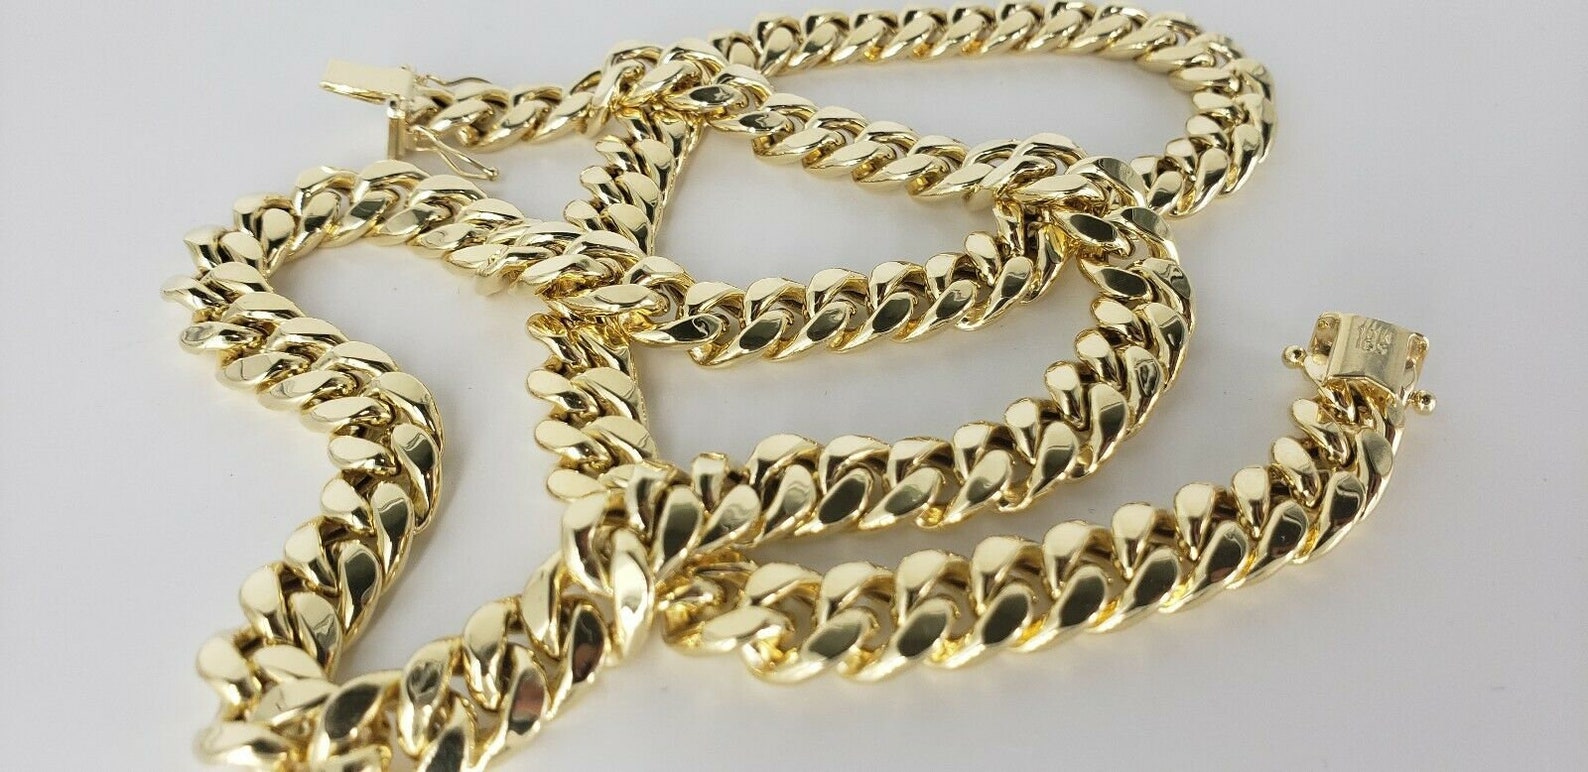 10K Yellow Gold 10mm Real Miami Cuban Link Chain Necklace | Etsy